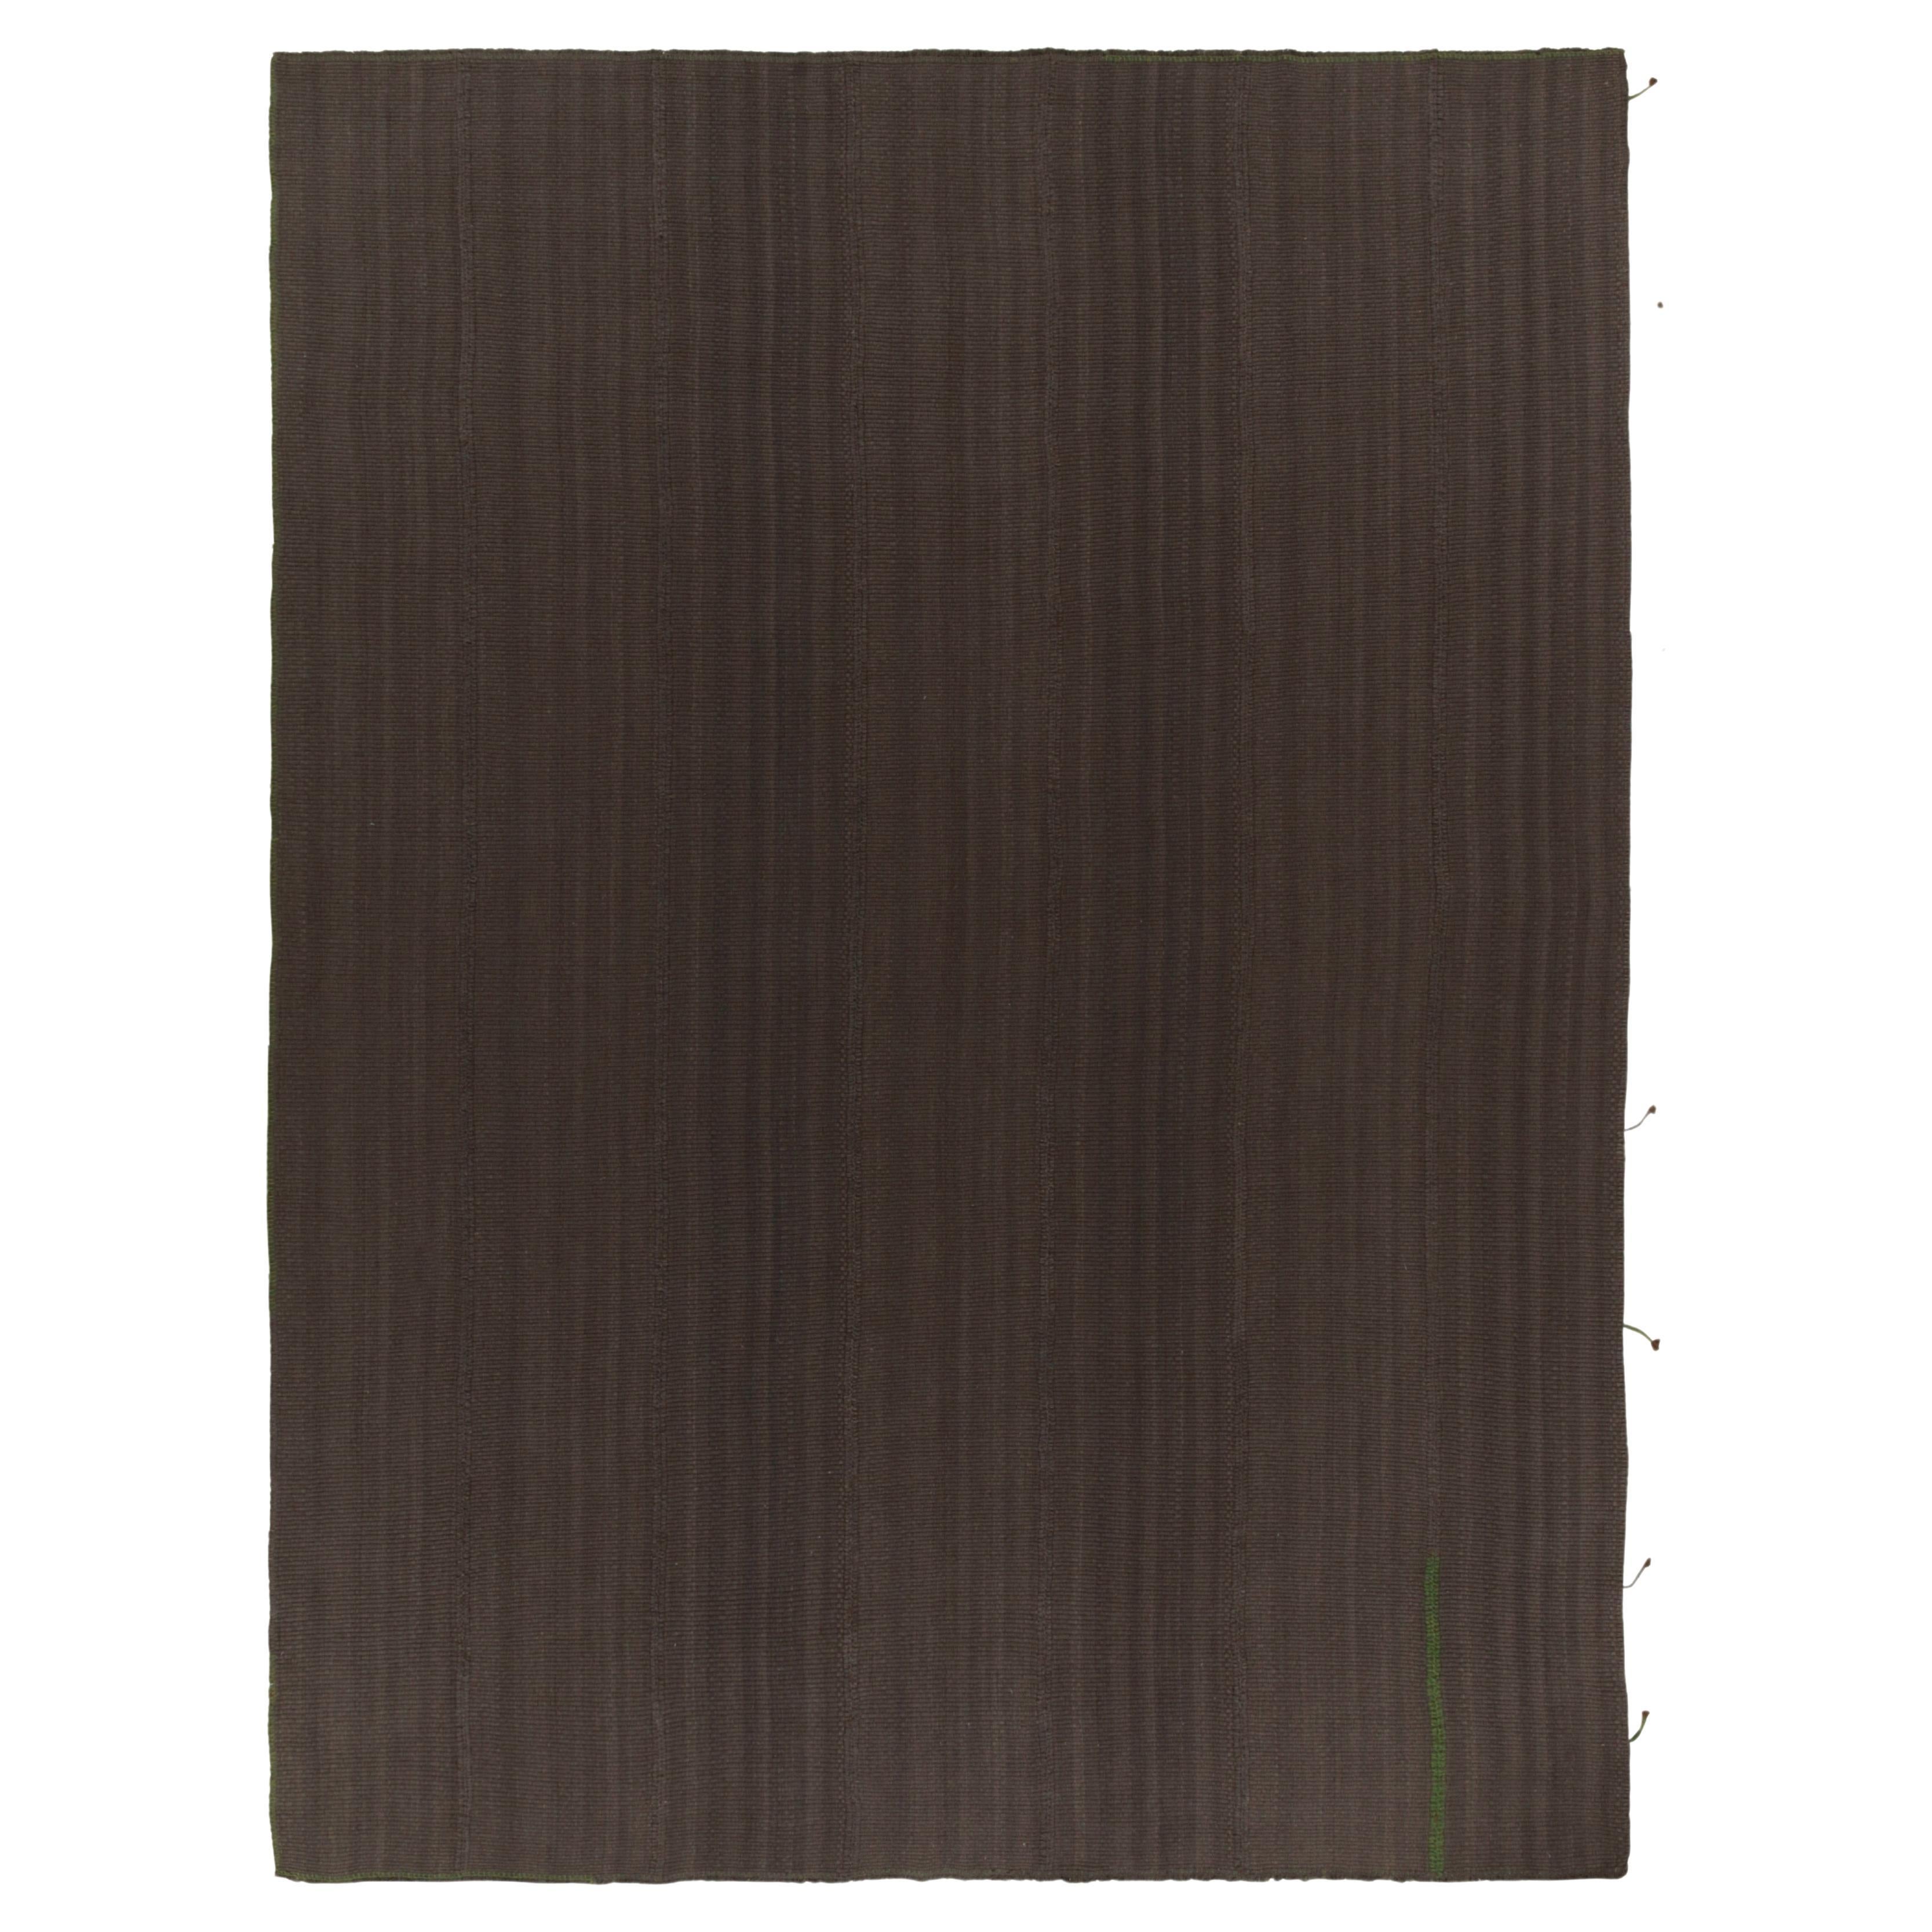 Rug & Kilim’s Contemporary Kilim in Rich Brown Stripes, Panel Woven style For Sale